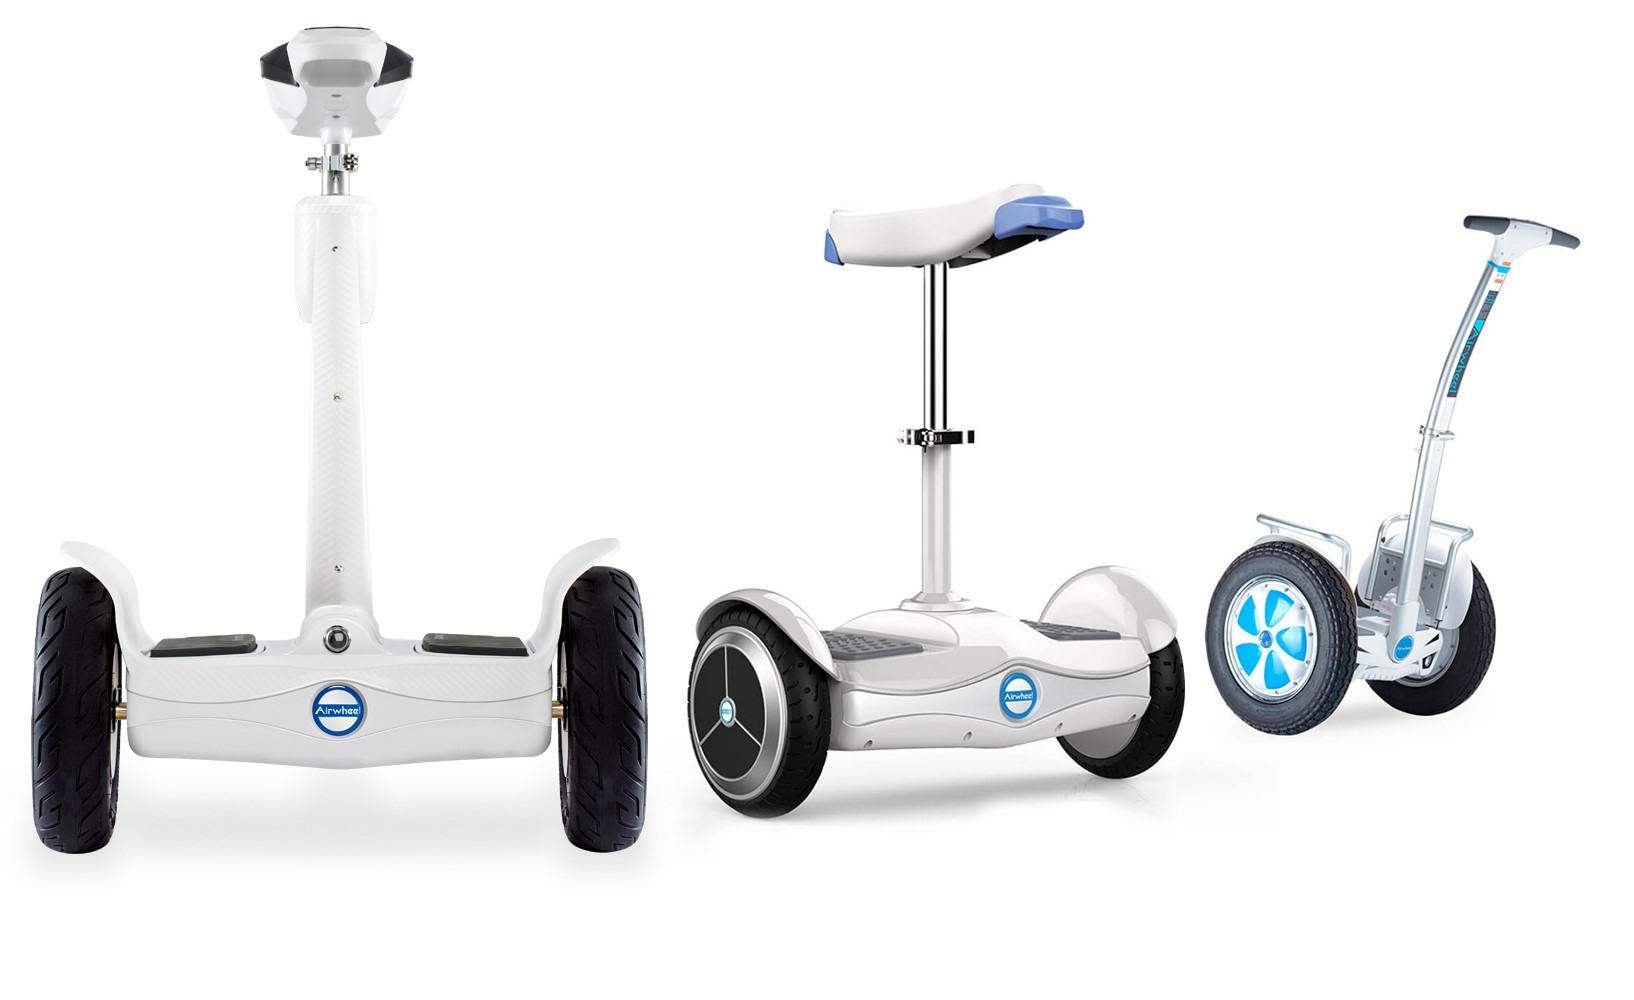 Airwheel S6 two wheel saddle-equipped scooter